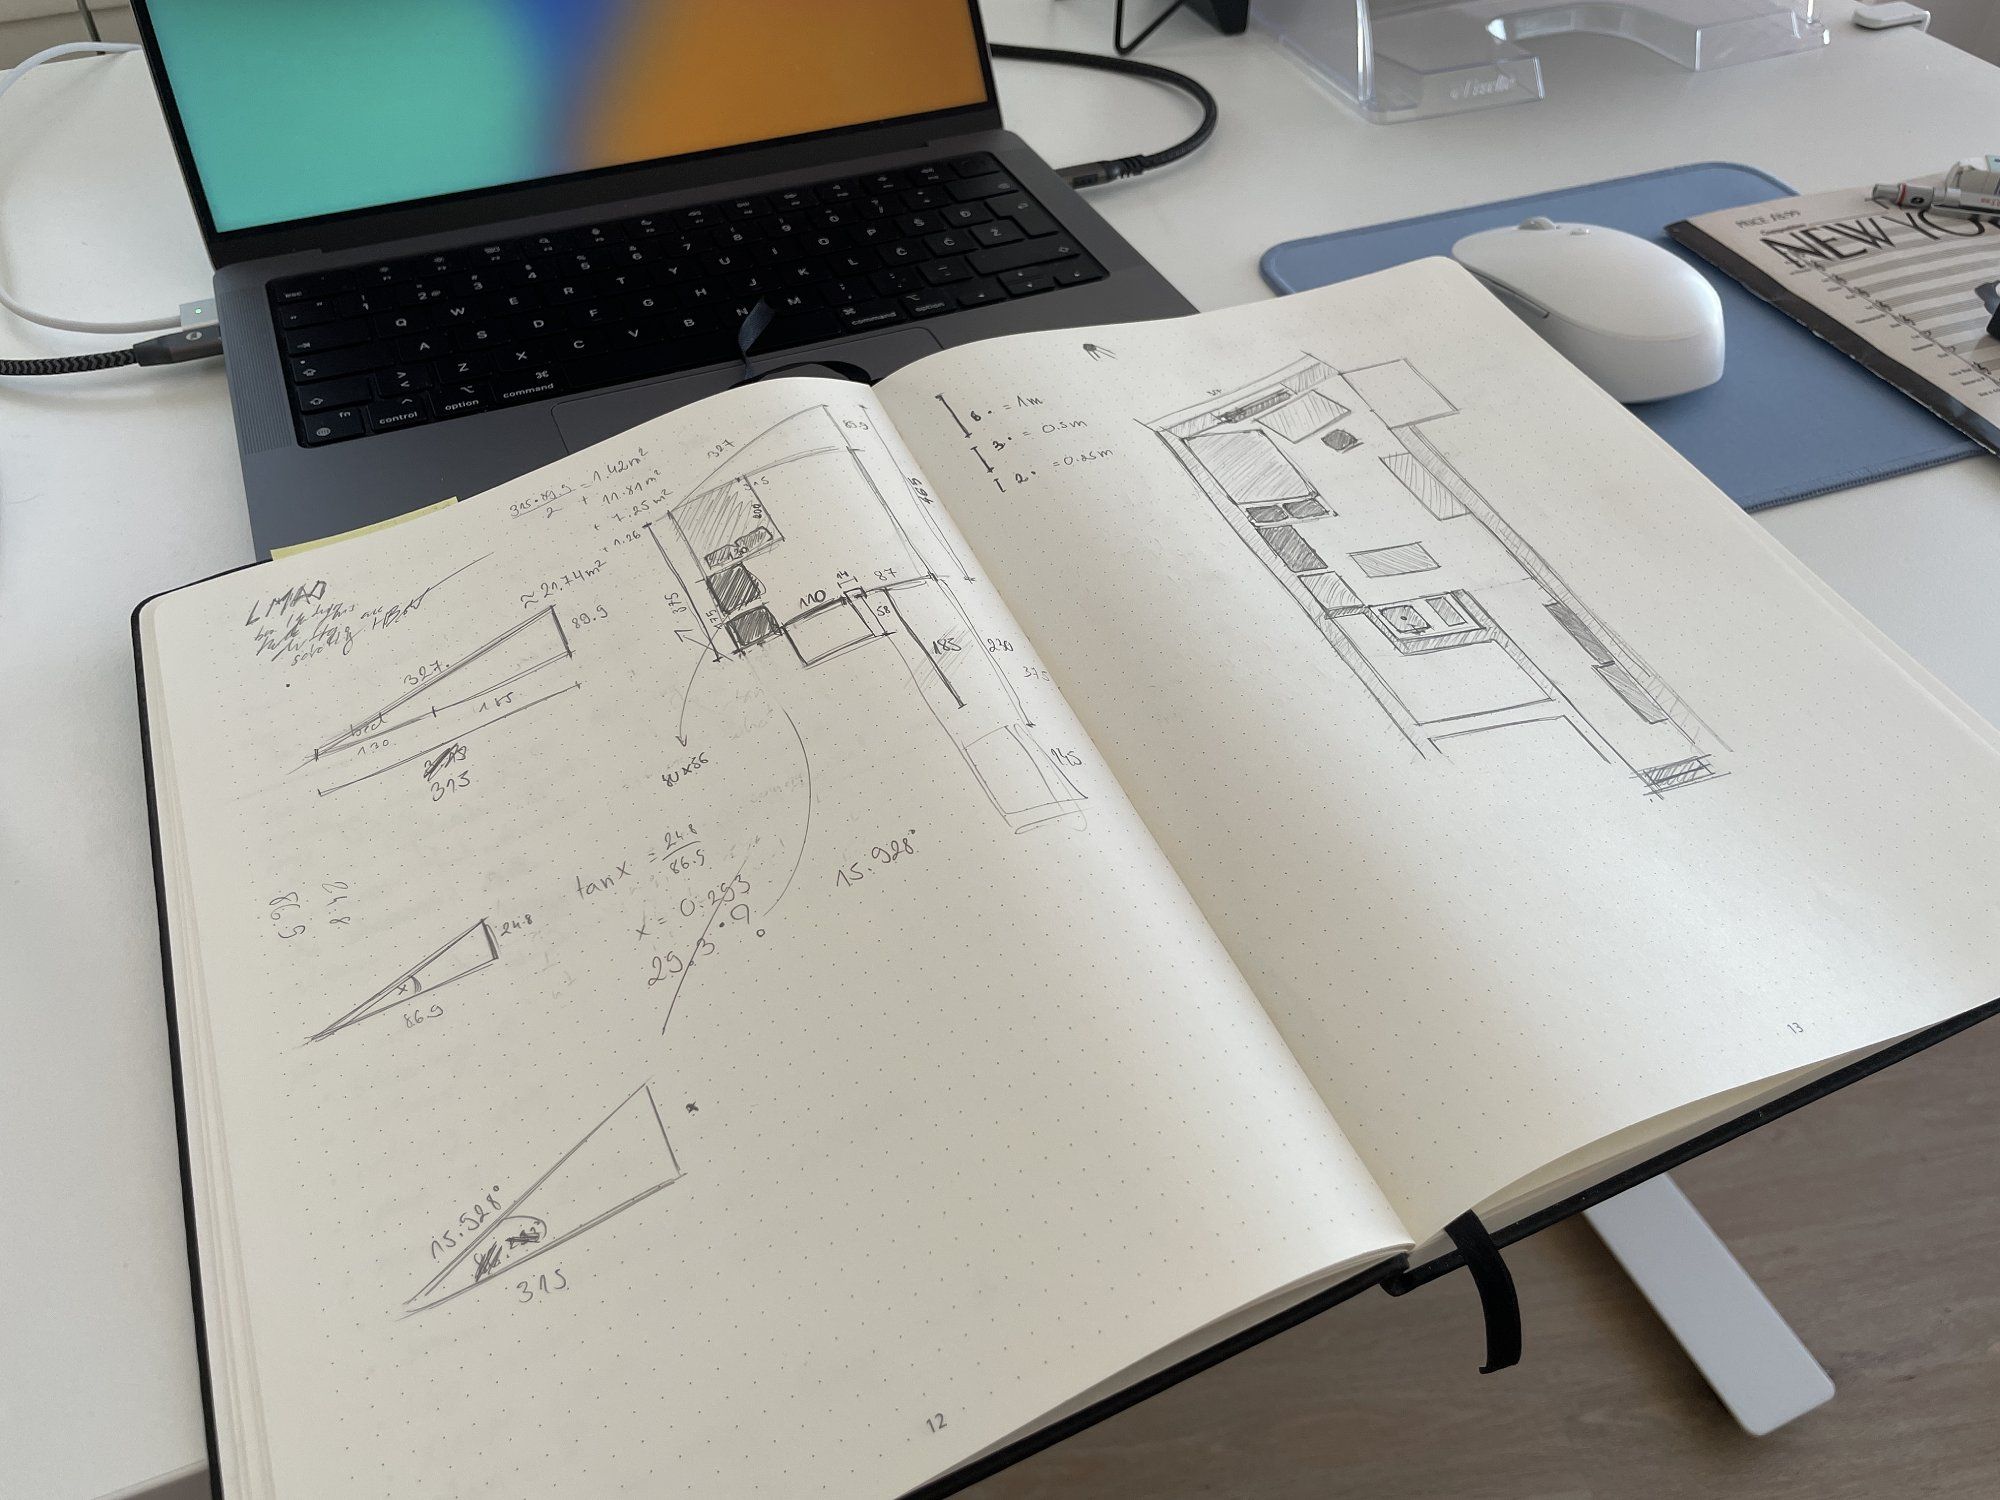 A notepad with blueprints, calculations, and sketches lies in front of the MacBook Pro on the desk